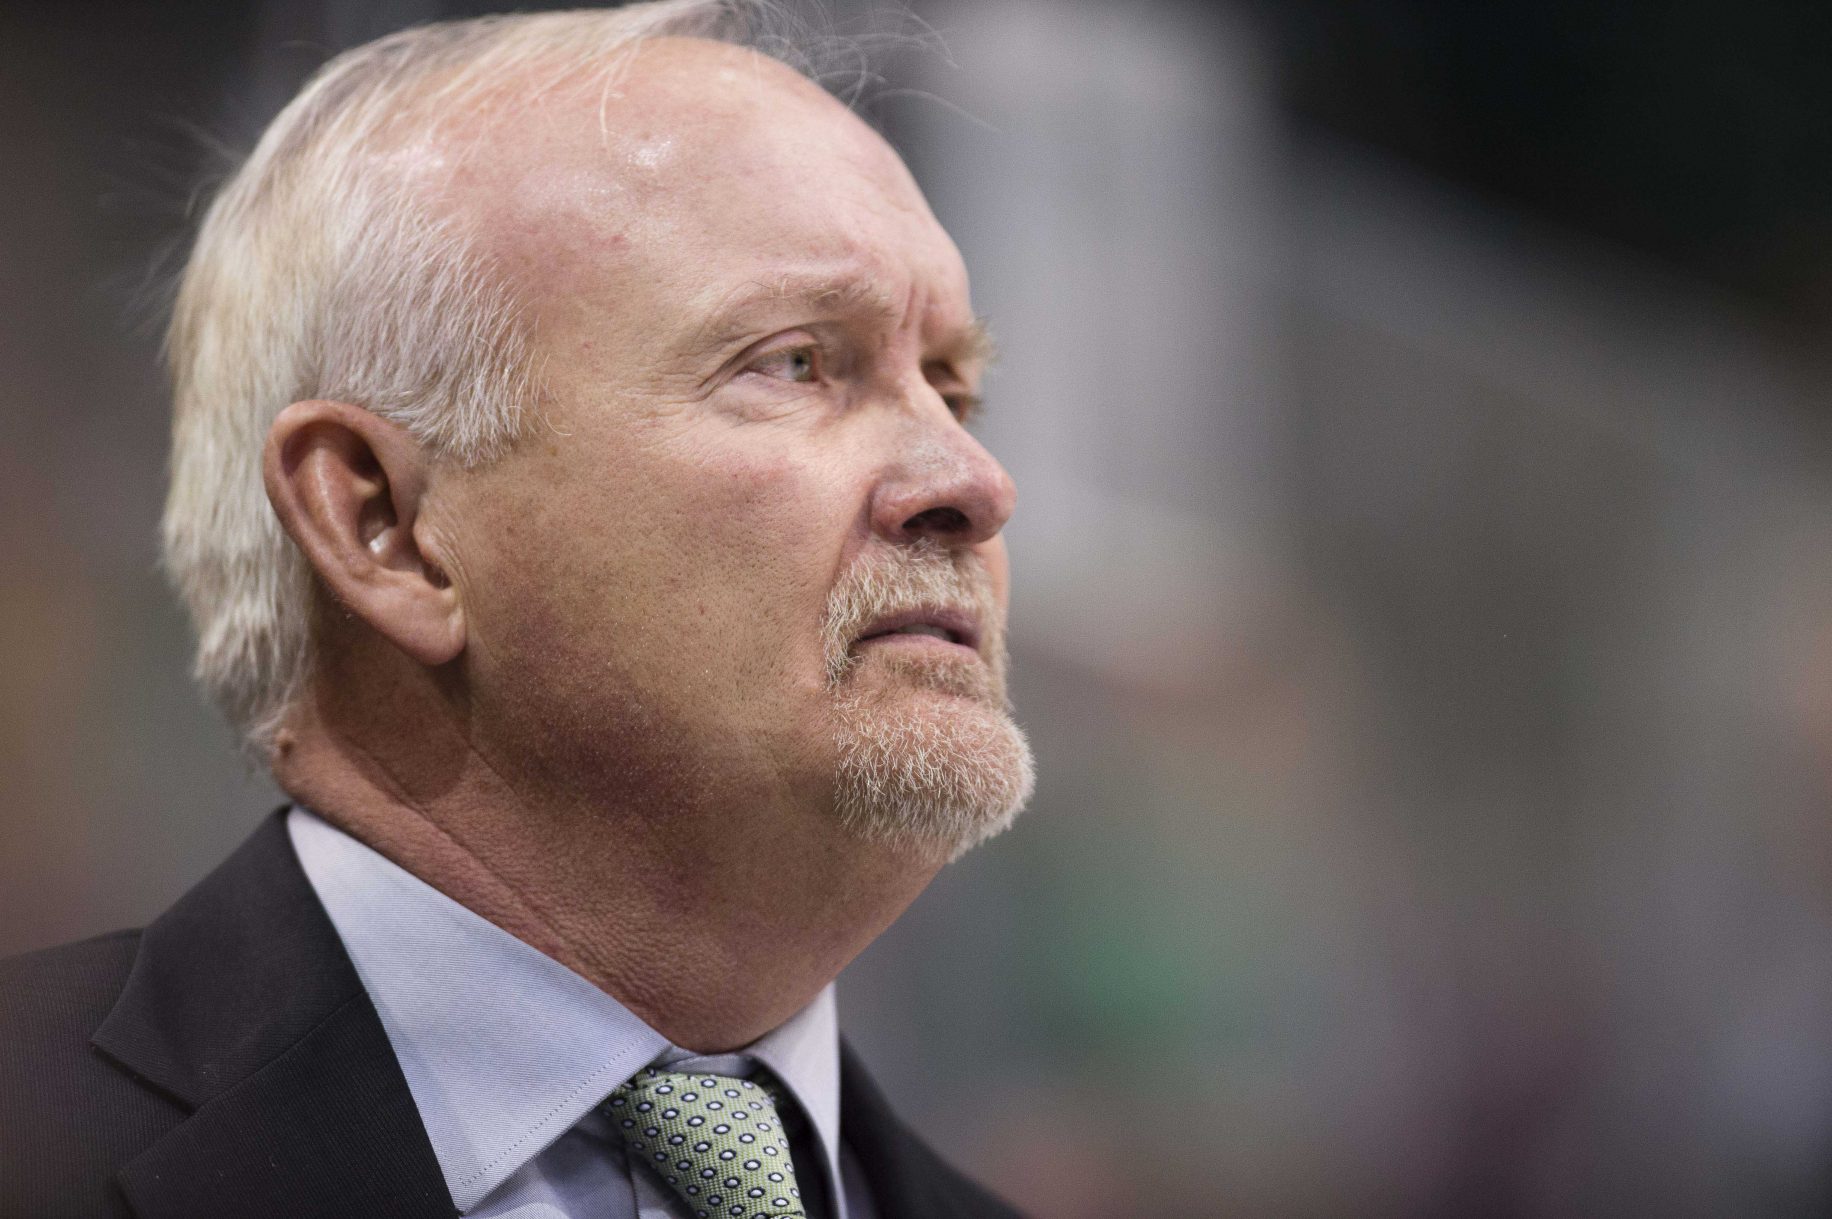 It's Time For the New Jersey Devils to Find a New Head Coach: Lindy Ruff, Perhaps 1